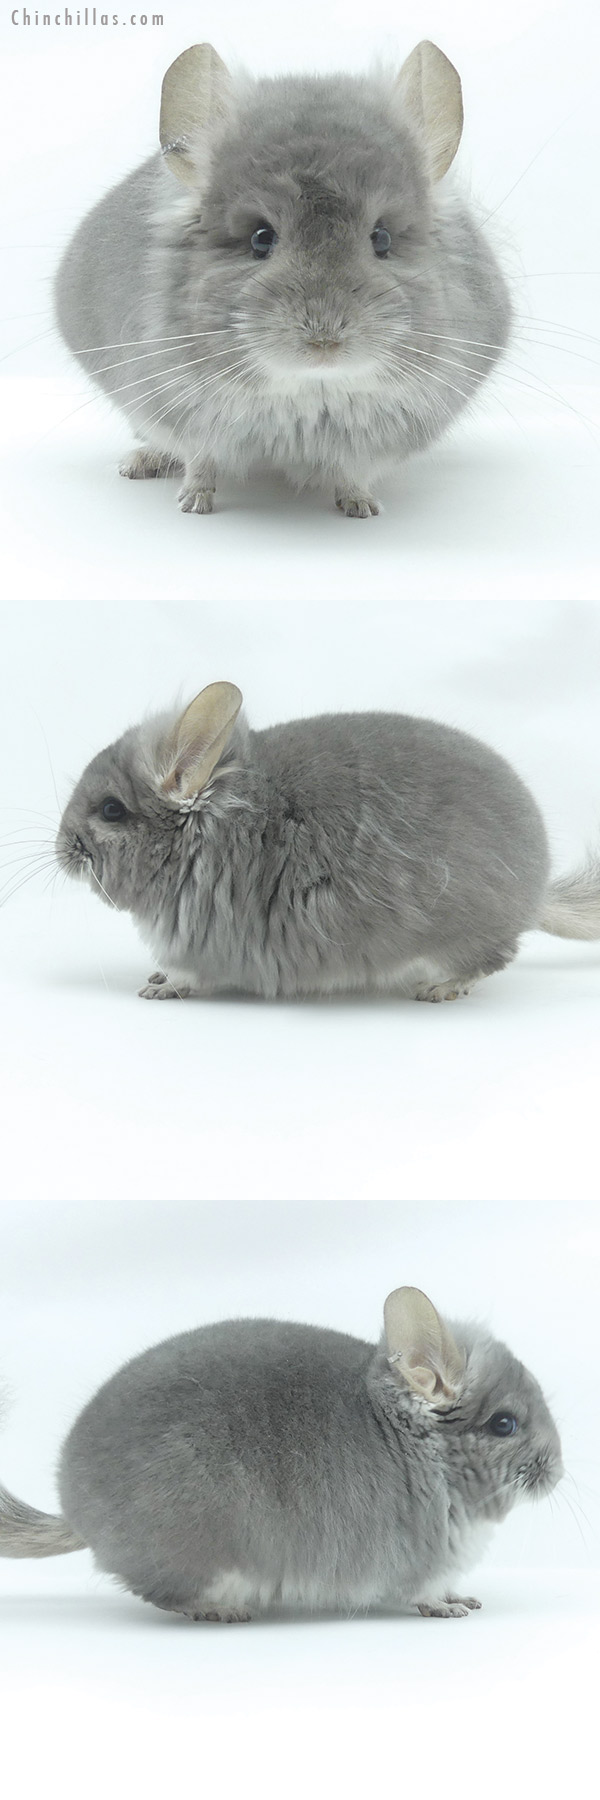 Chinchilla or related item offered for sale or export on Chinchillas.com - 20092 Violet  Royal Persian Angora Male Chinchilla